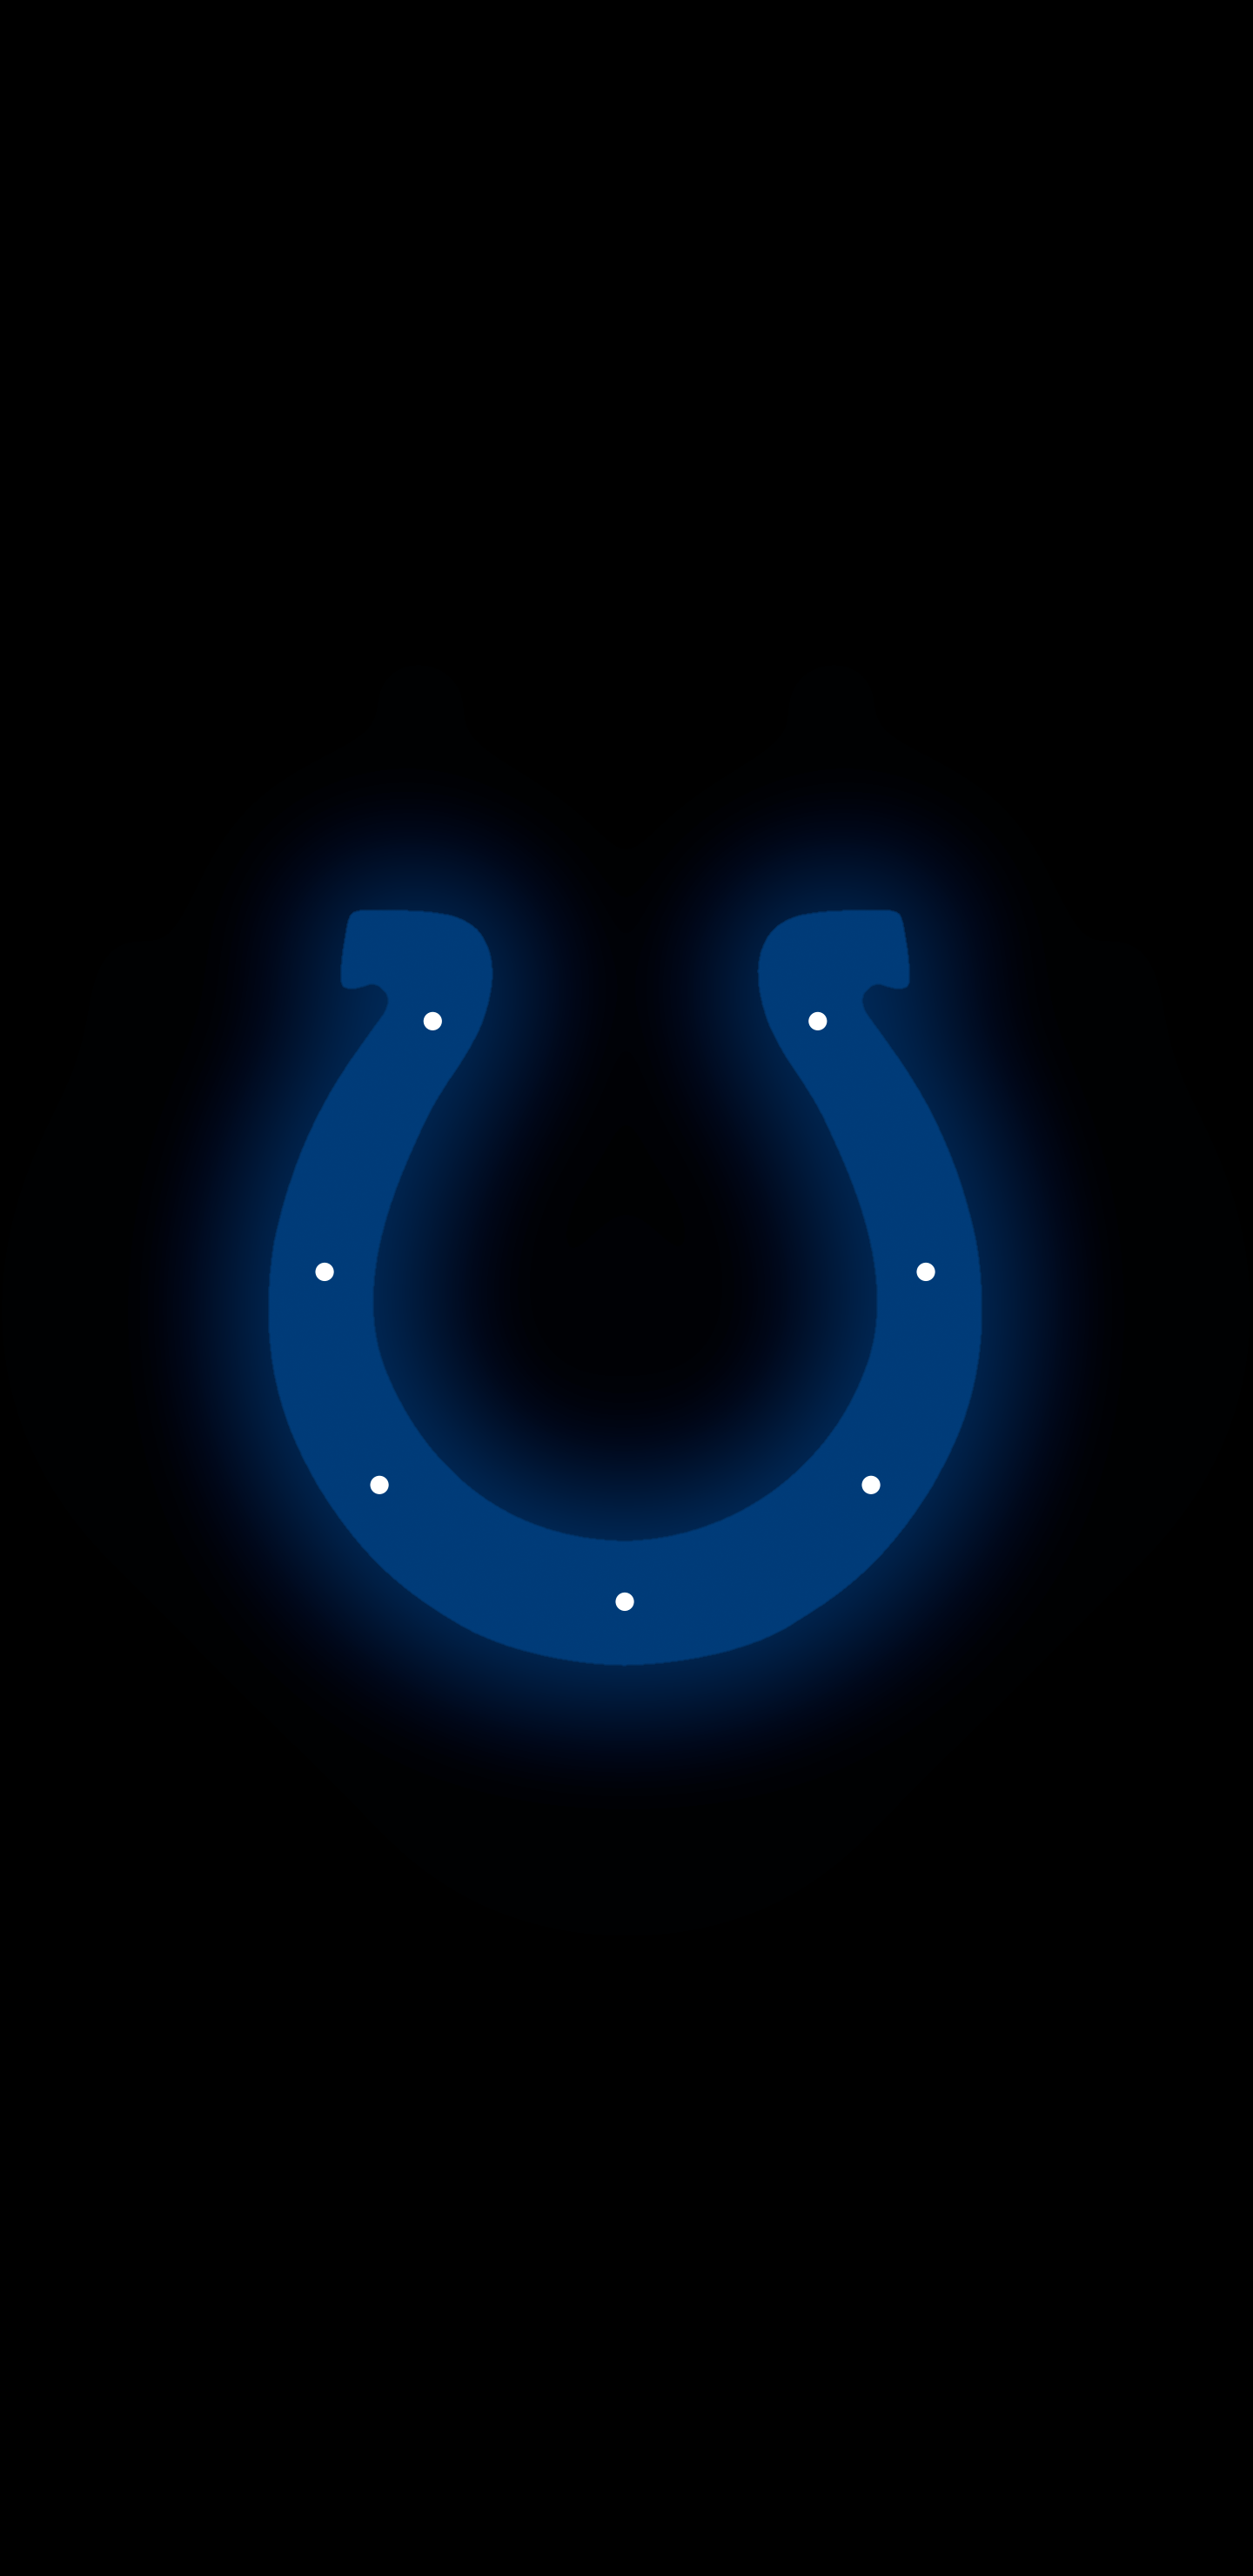 I'm making an amoled wallpaper for every NFL team! 12 down